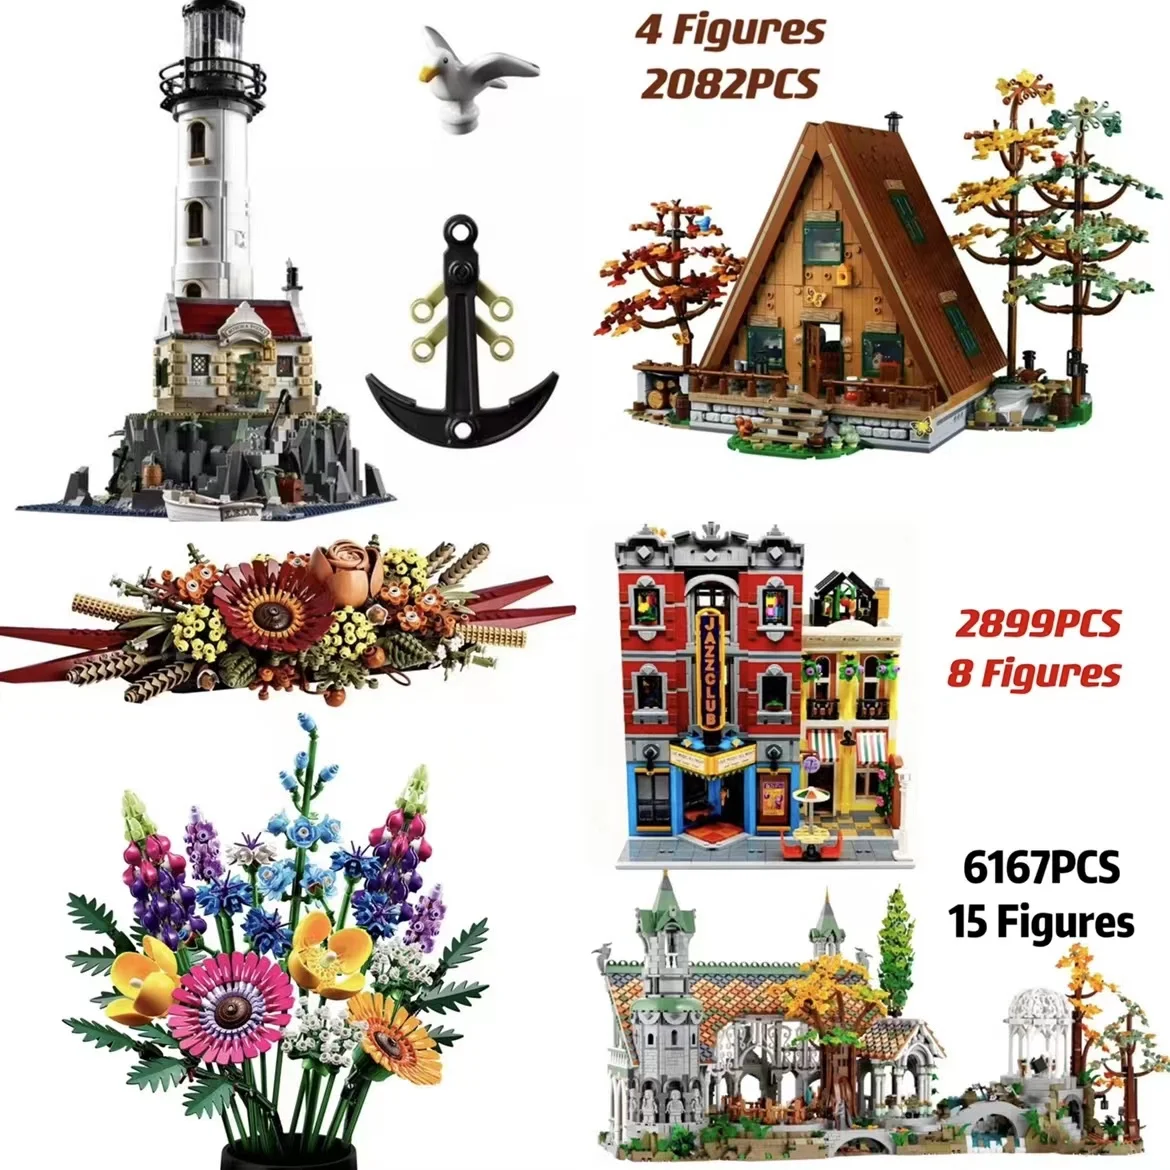 

NEW 10316 Lorded Of Rings Rivendell Set 10312 Jazz Club Building Blocks 21338 A- Frame Cabin Wildflower Brick Toy Gift Kid Adult